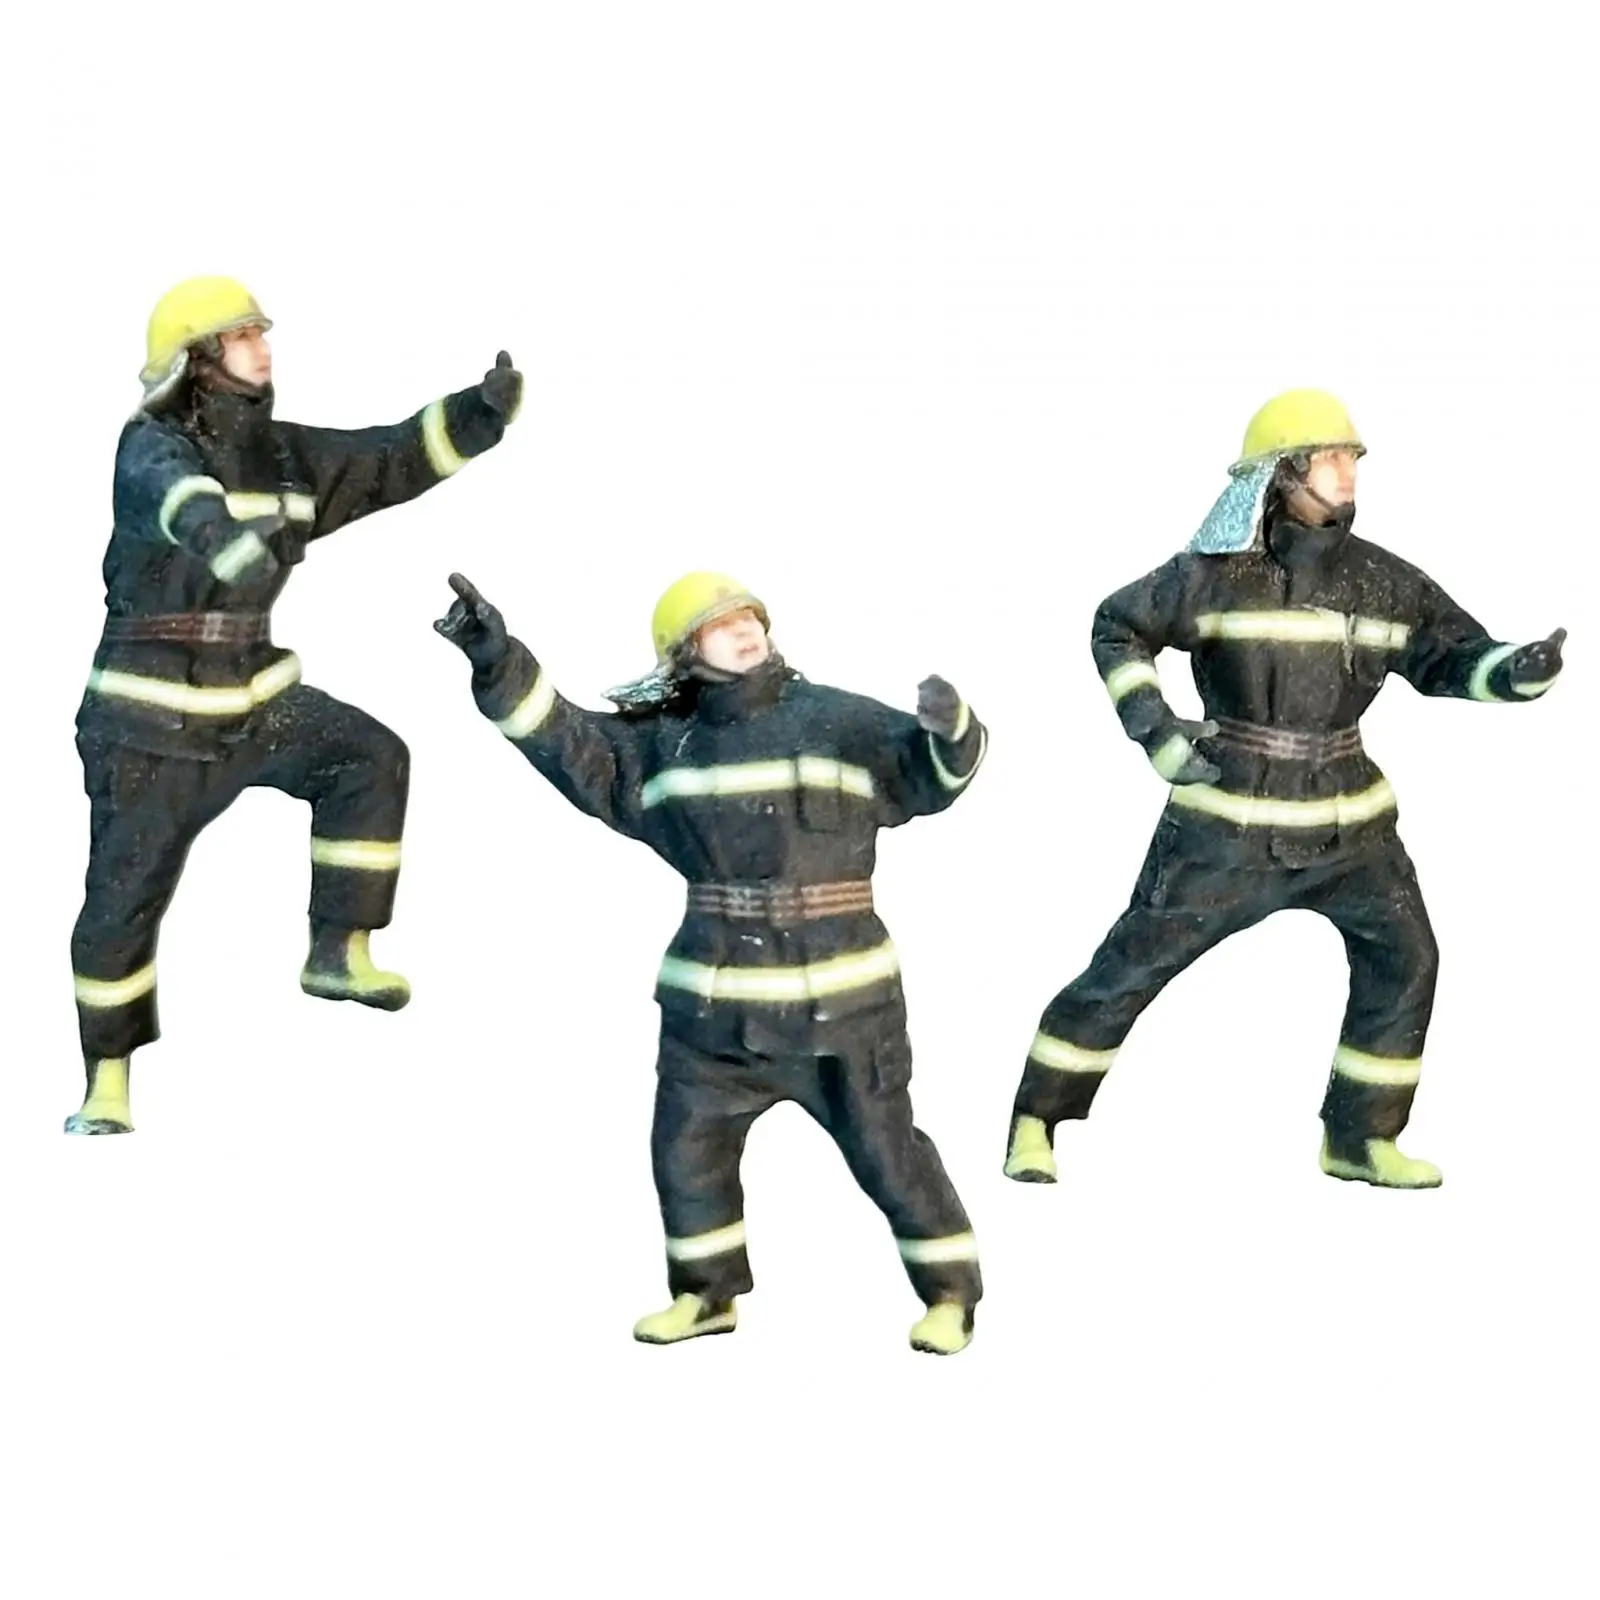 3Pcs Miniature Firefighter Figures Realistic Model Trains People Figures for Photography Props DIY Scene Dollhouse Decoration